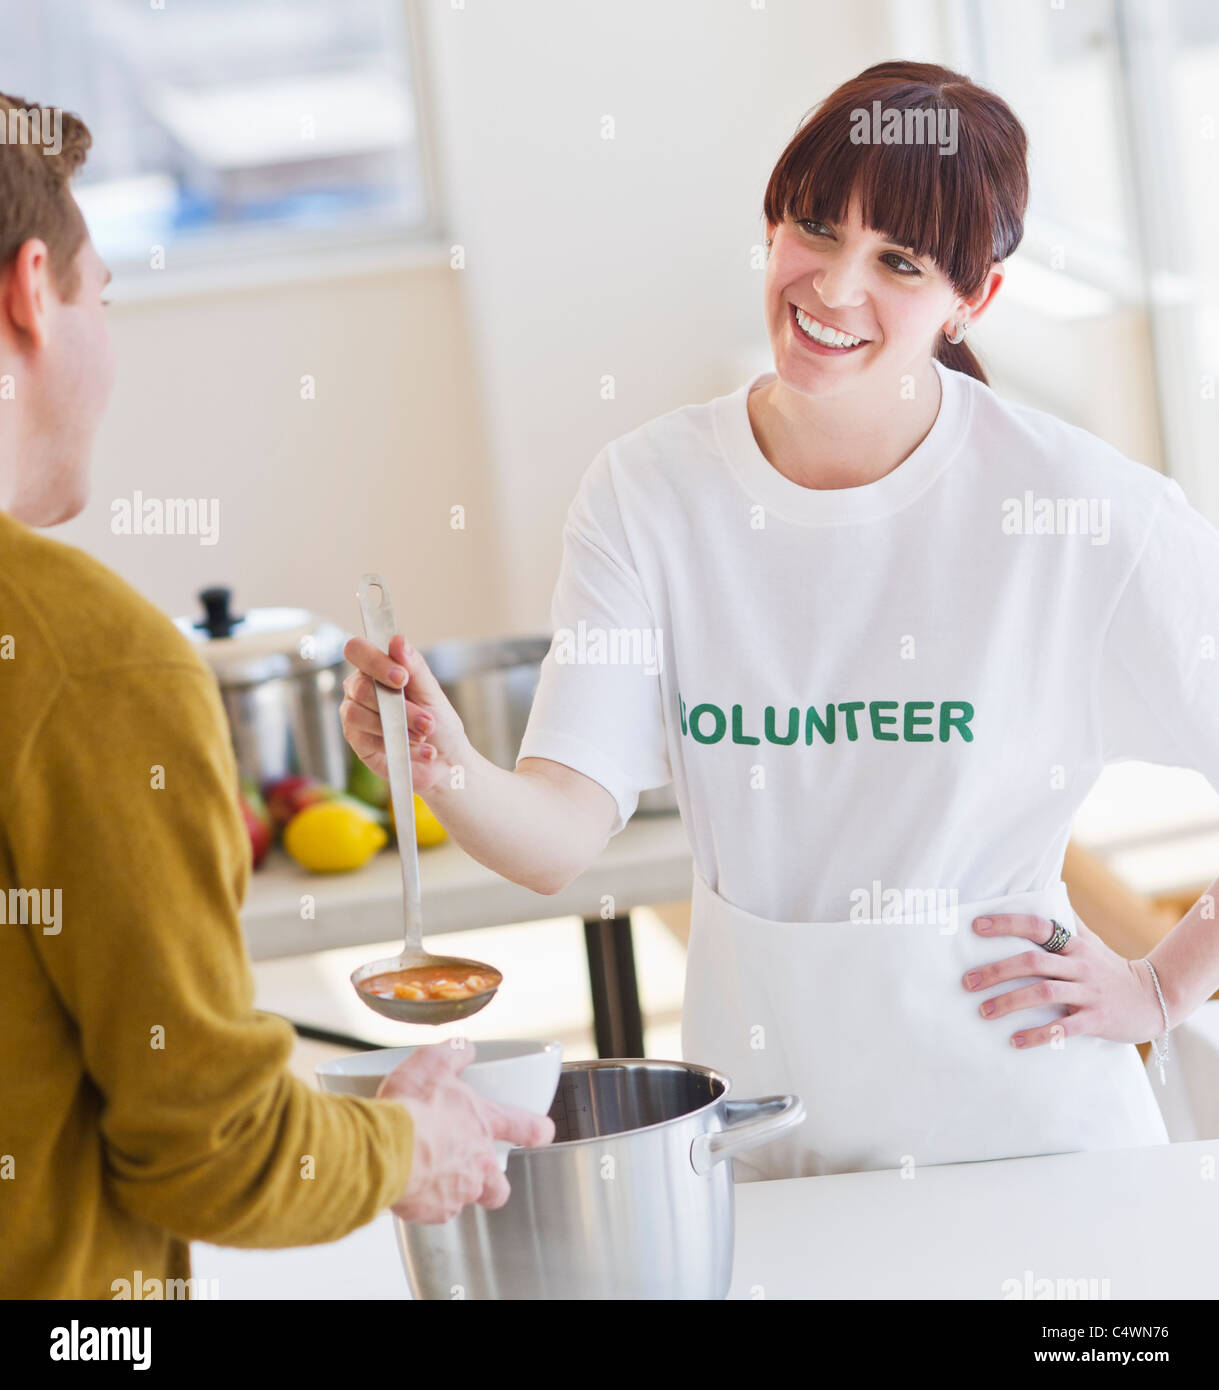 USA,New Jersey,Jersey City,charity volunteer handing out free soup Stock Photo